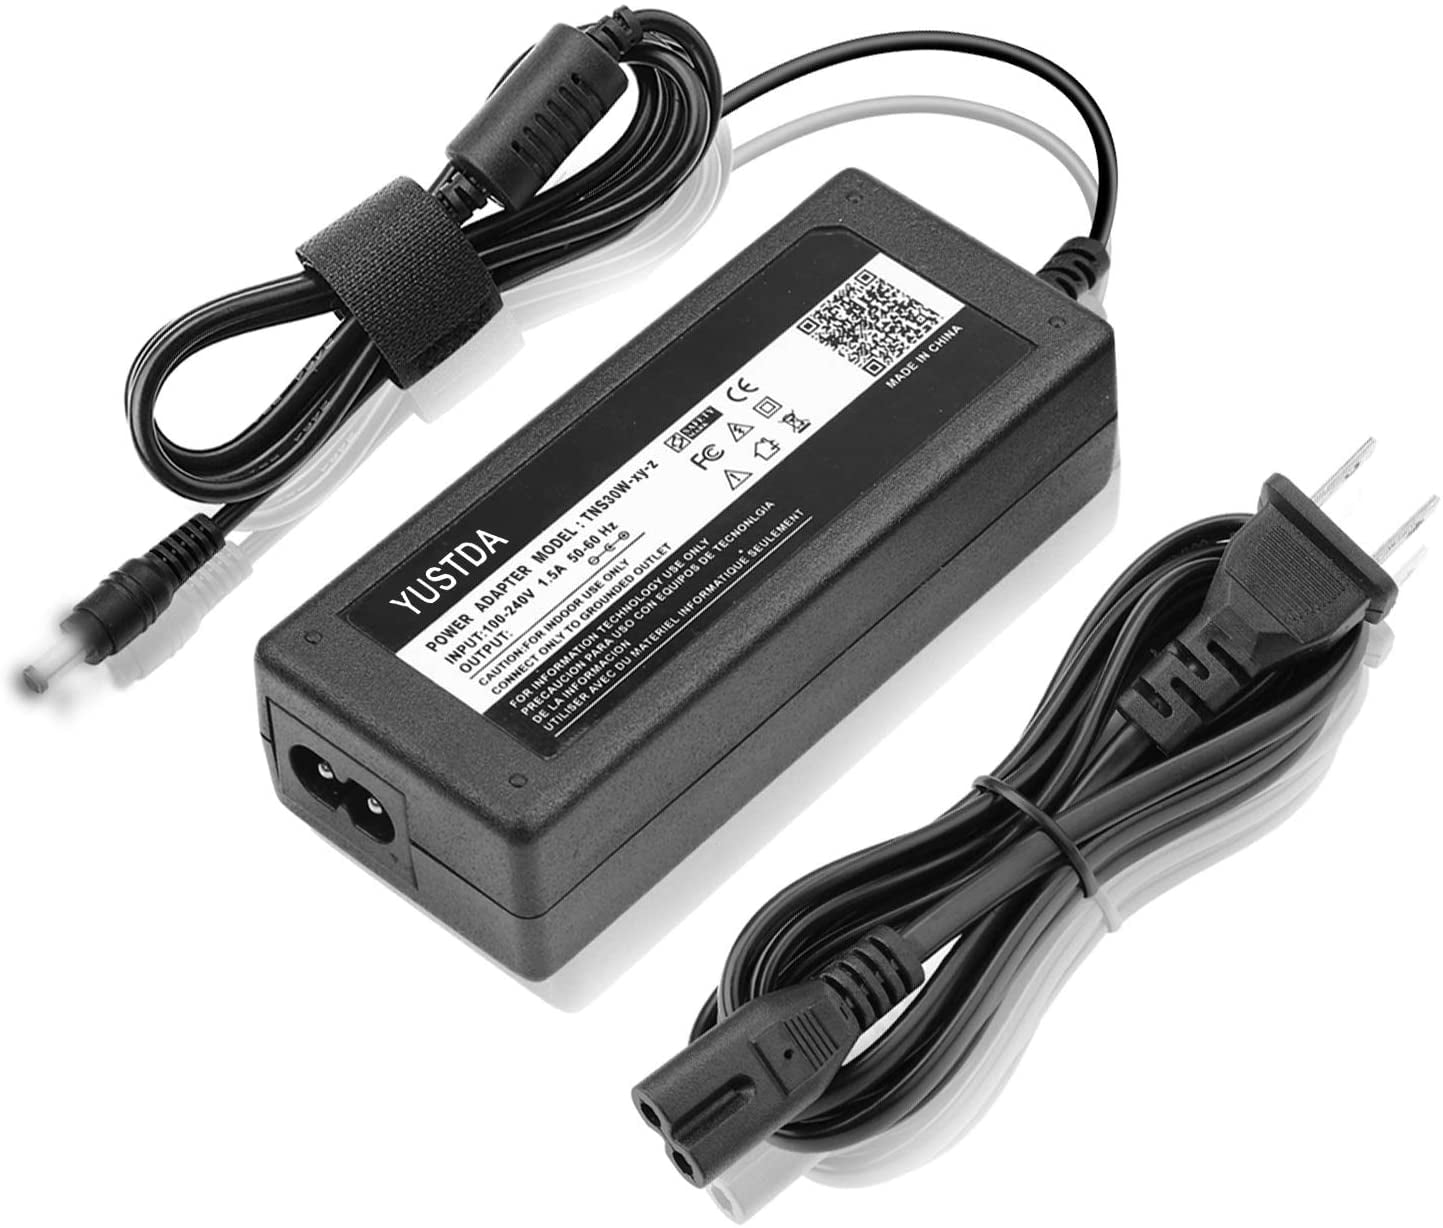 UpBright 16V AC/DC Adapter Replacement for Yamaha P-120 Pro P-120S P120 S P120S PA-300C PA300C PA-300 C PA300 Keyboard Piano Tone Generator Motif XS Rack Synthesizer Sound Module 2.4A Power Supply 